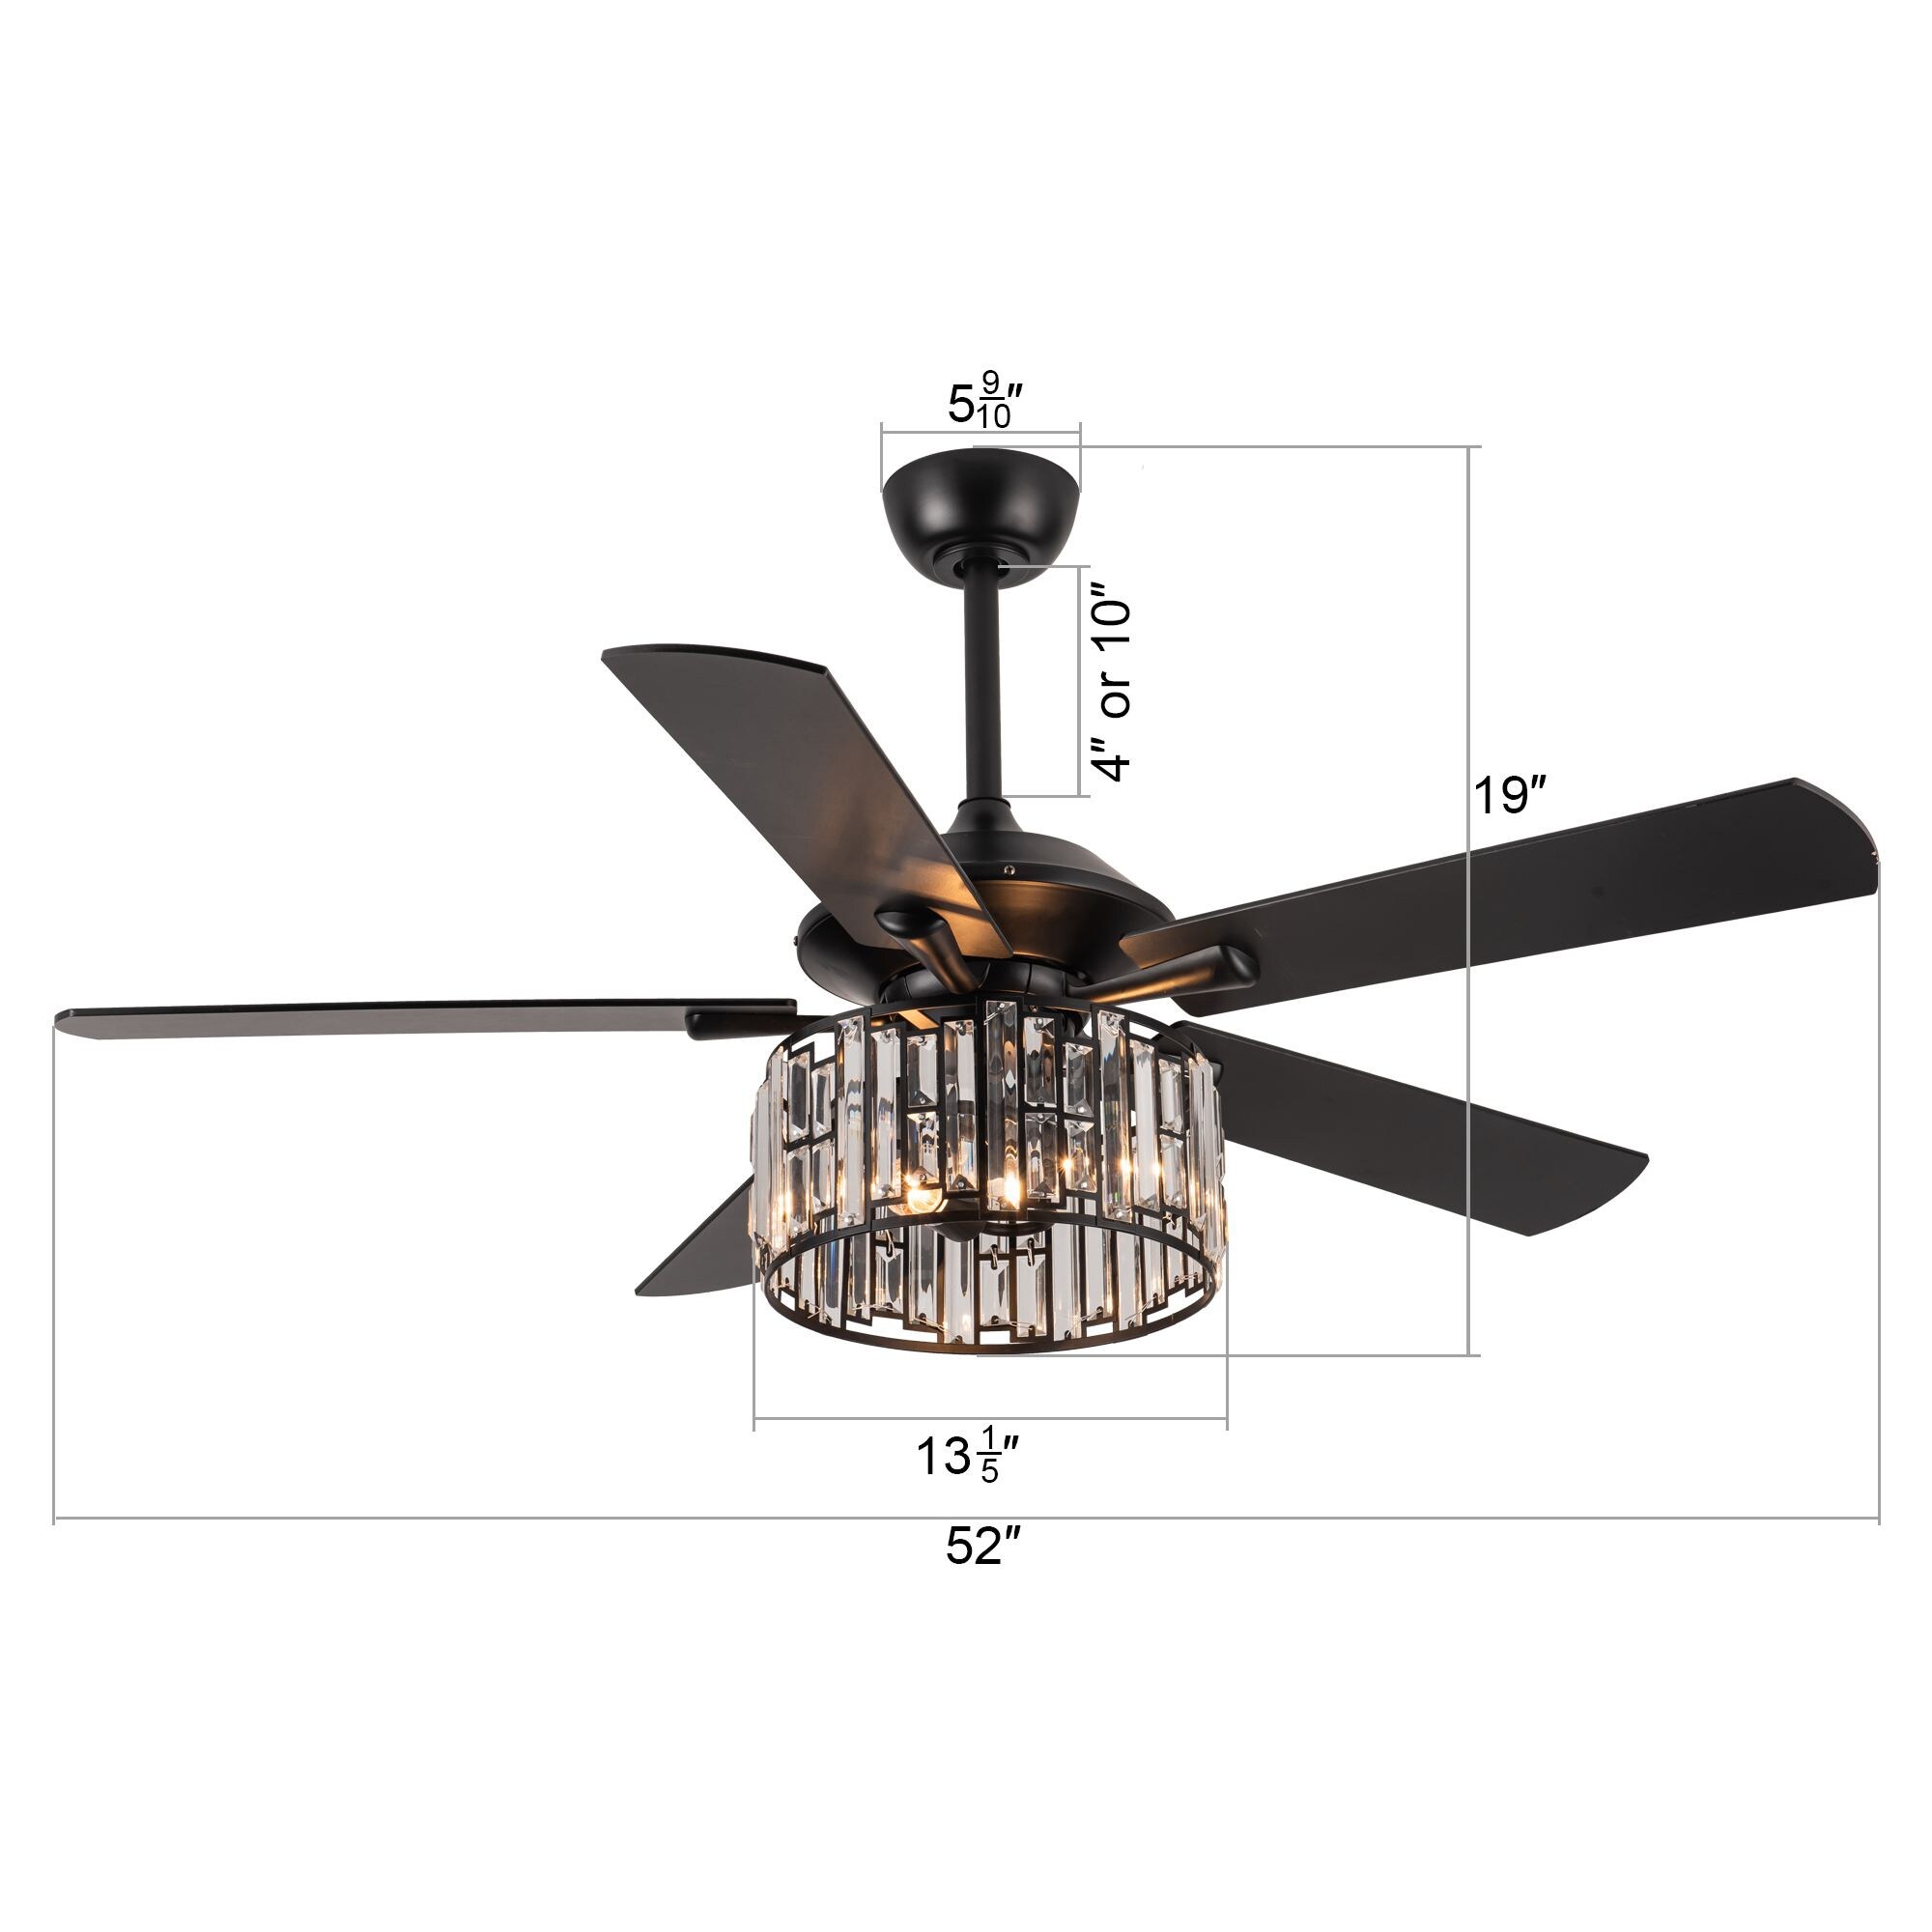 52" Modern Matte Black 5-Blade Crystal Ceiling Fan with Remote